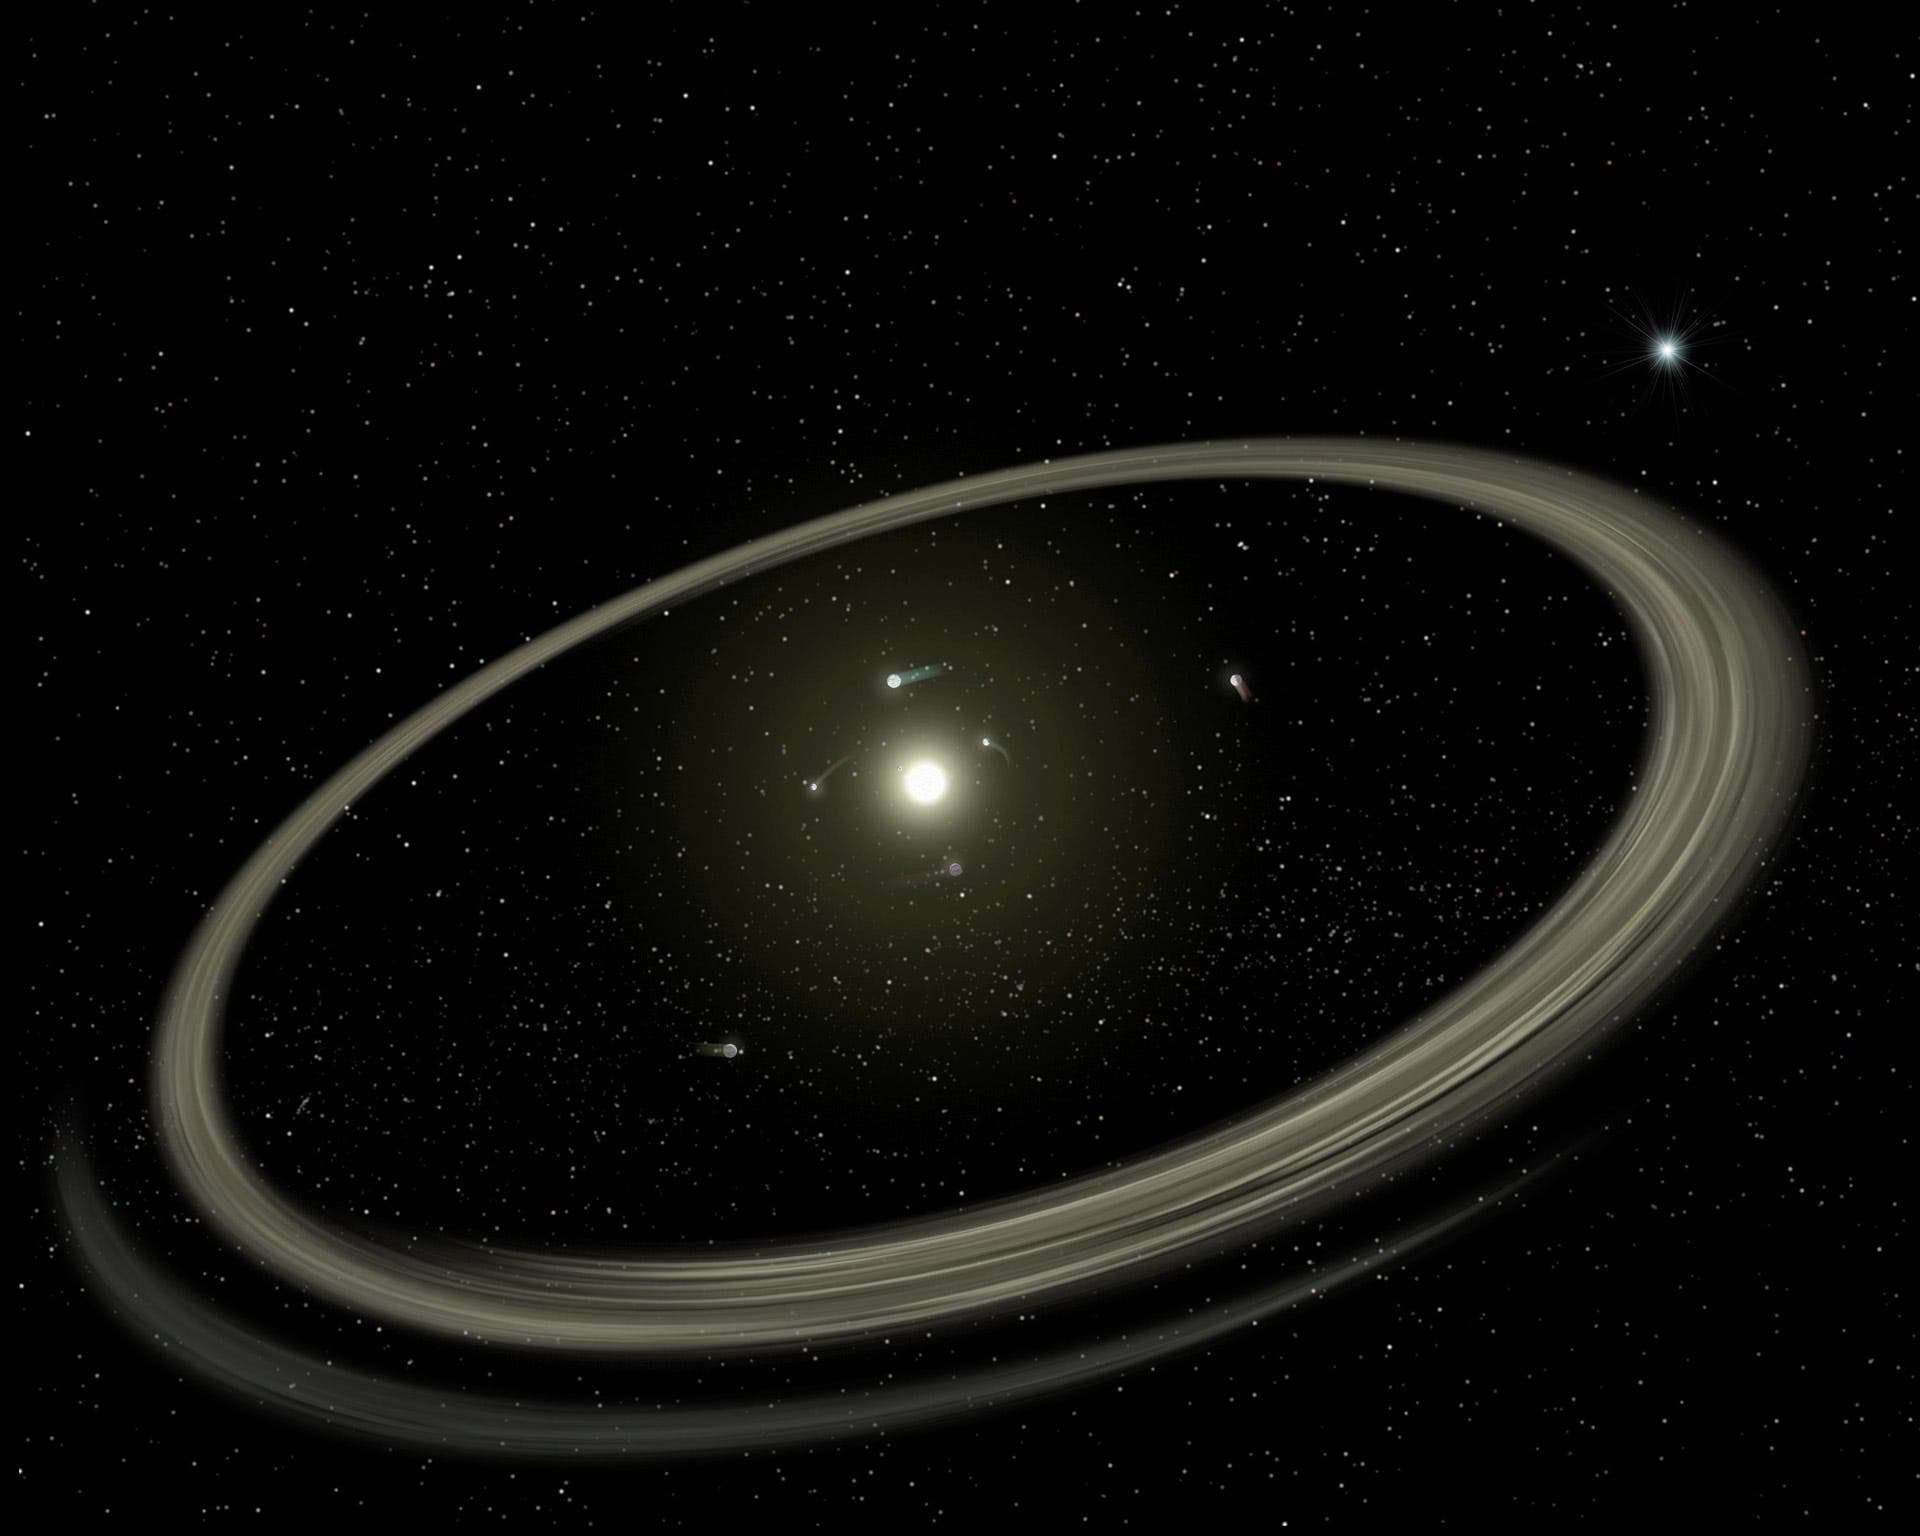 Illustration of a planetary system surrounded by a debris disk. Credit: NASA